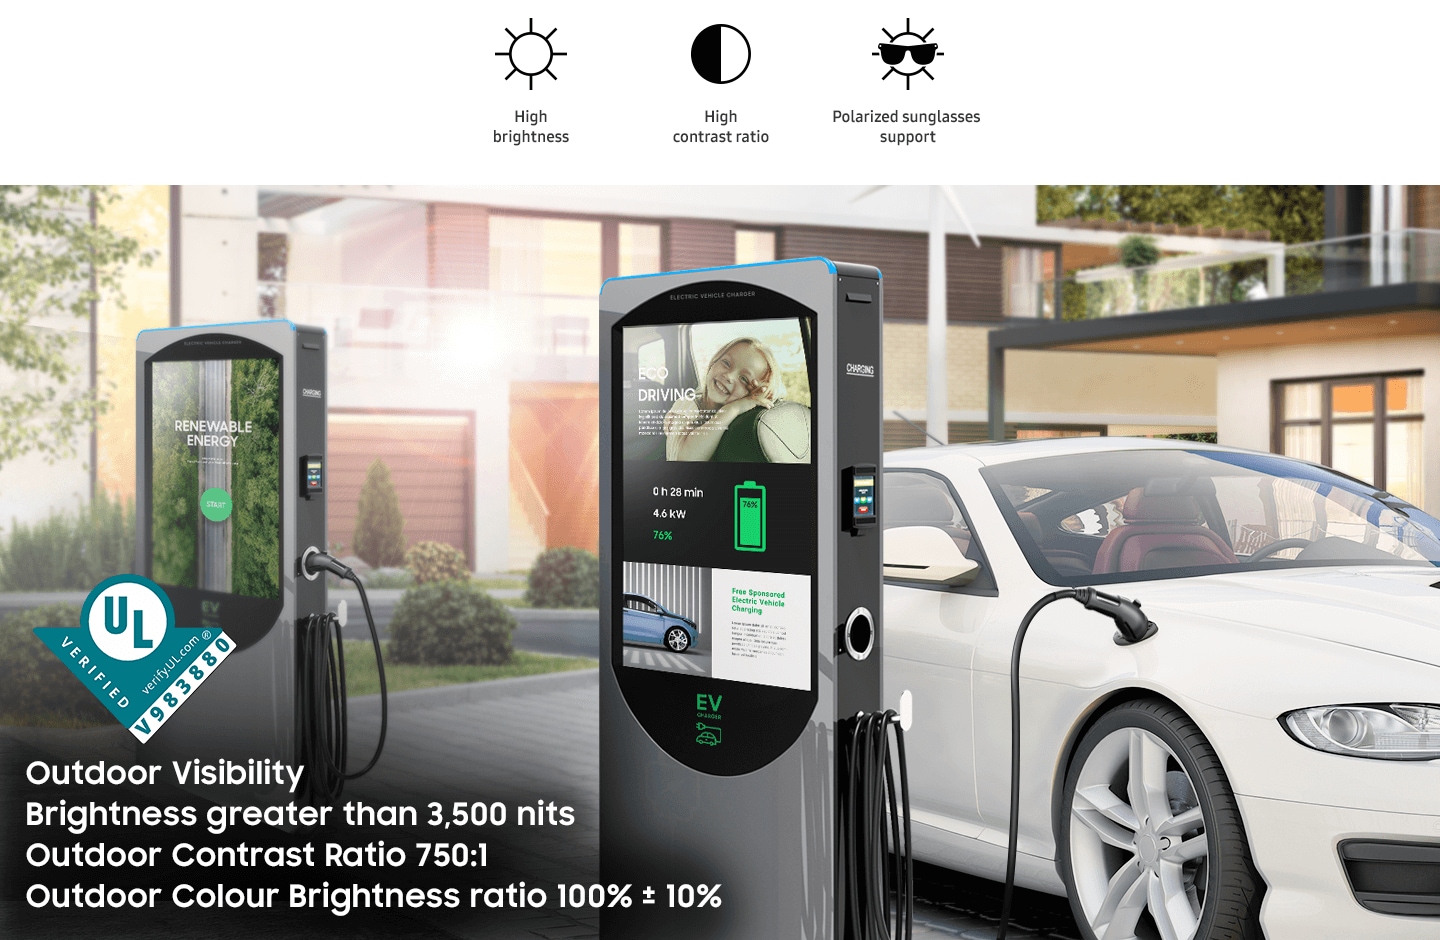 OH46B installed at an electric vehicle charging station. There is a 